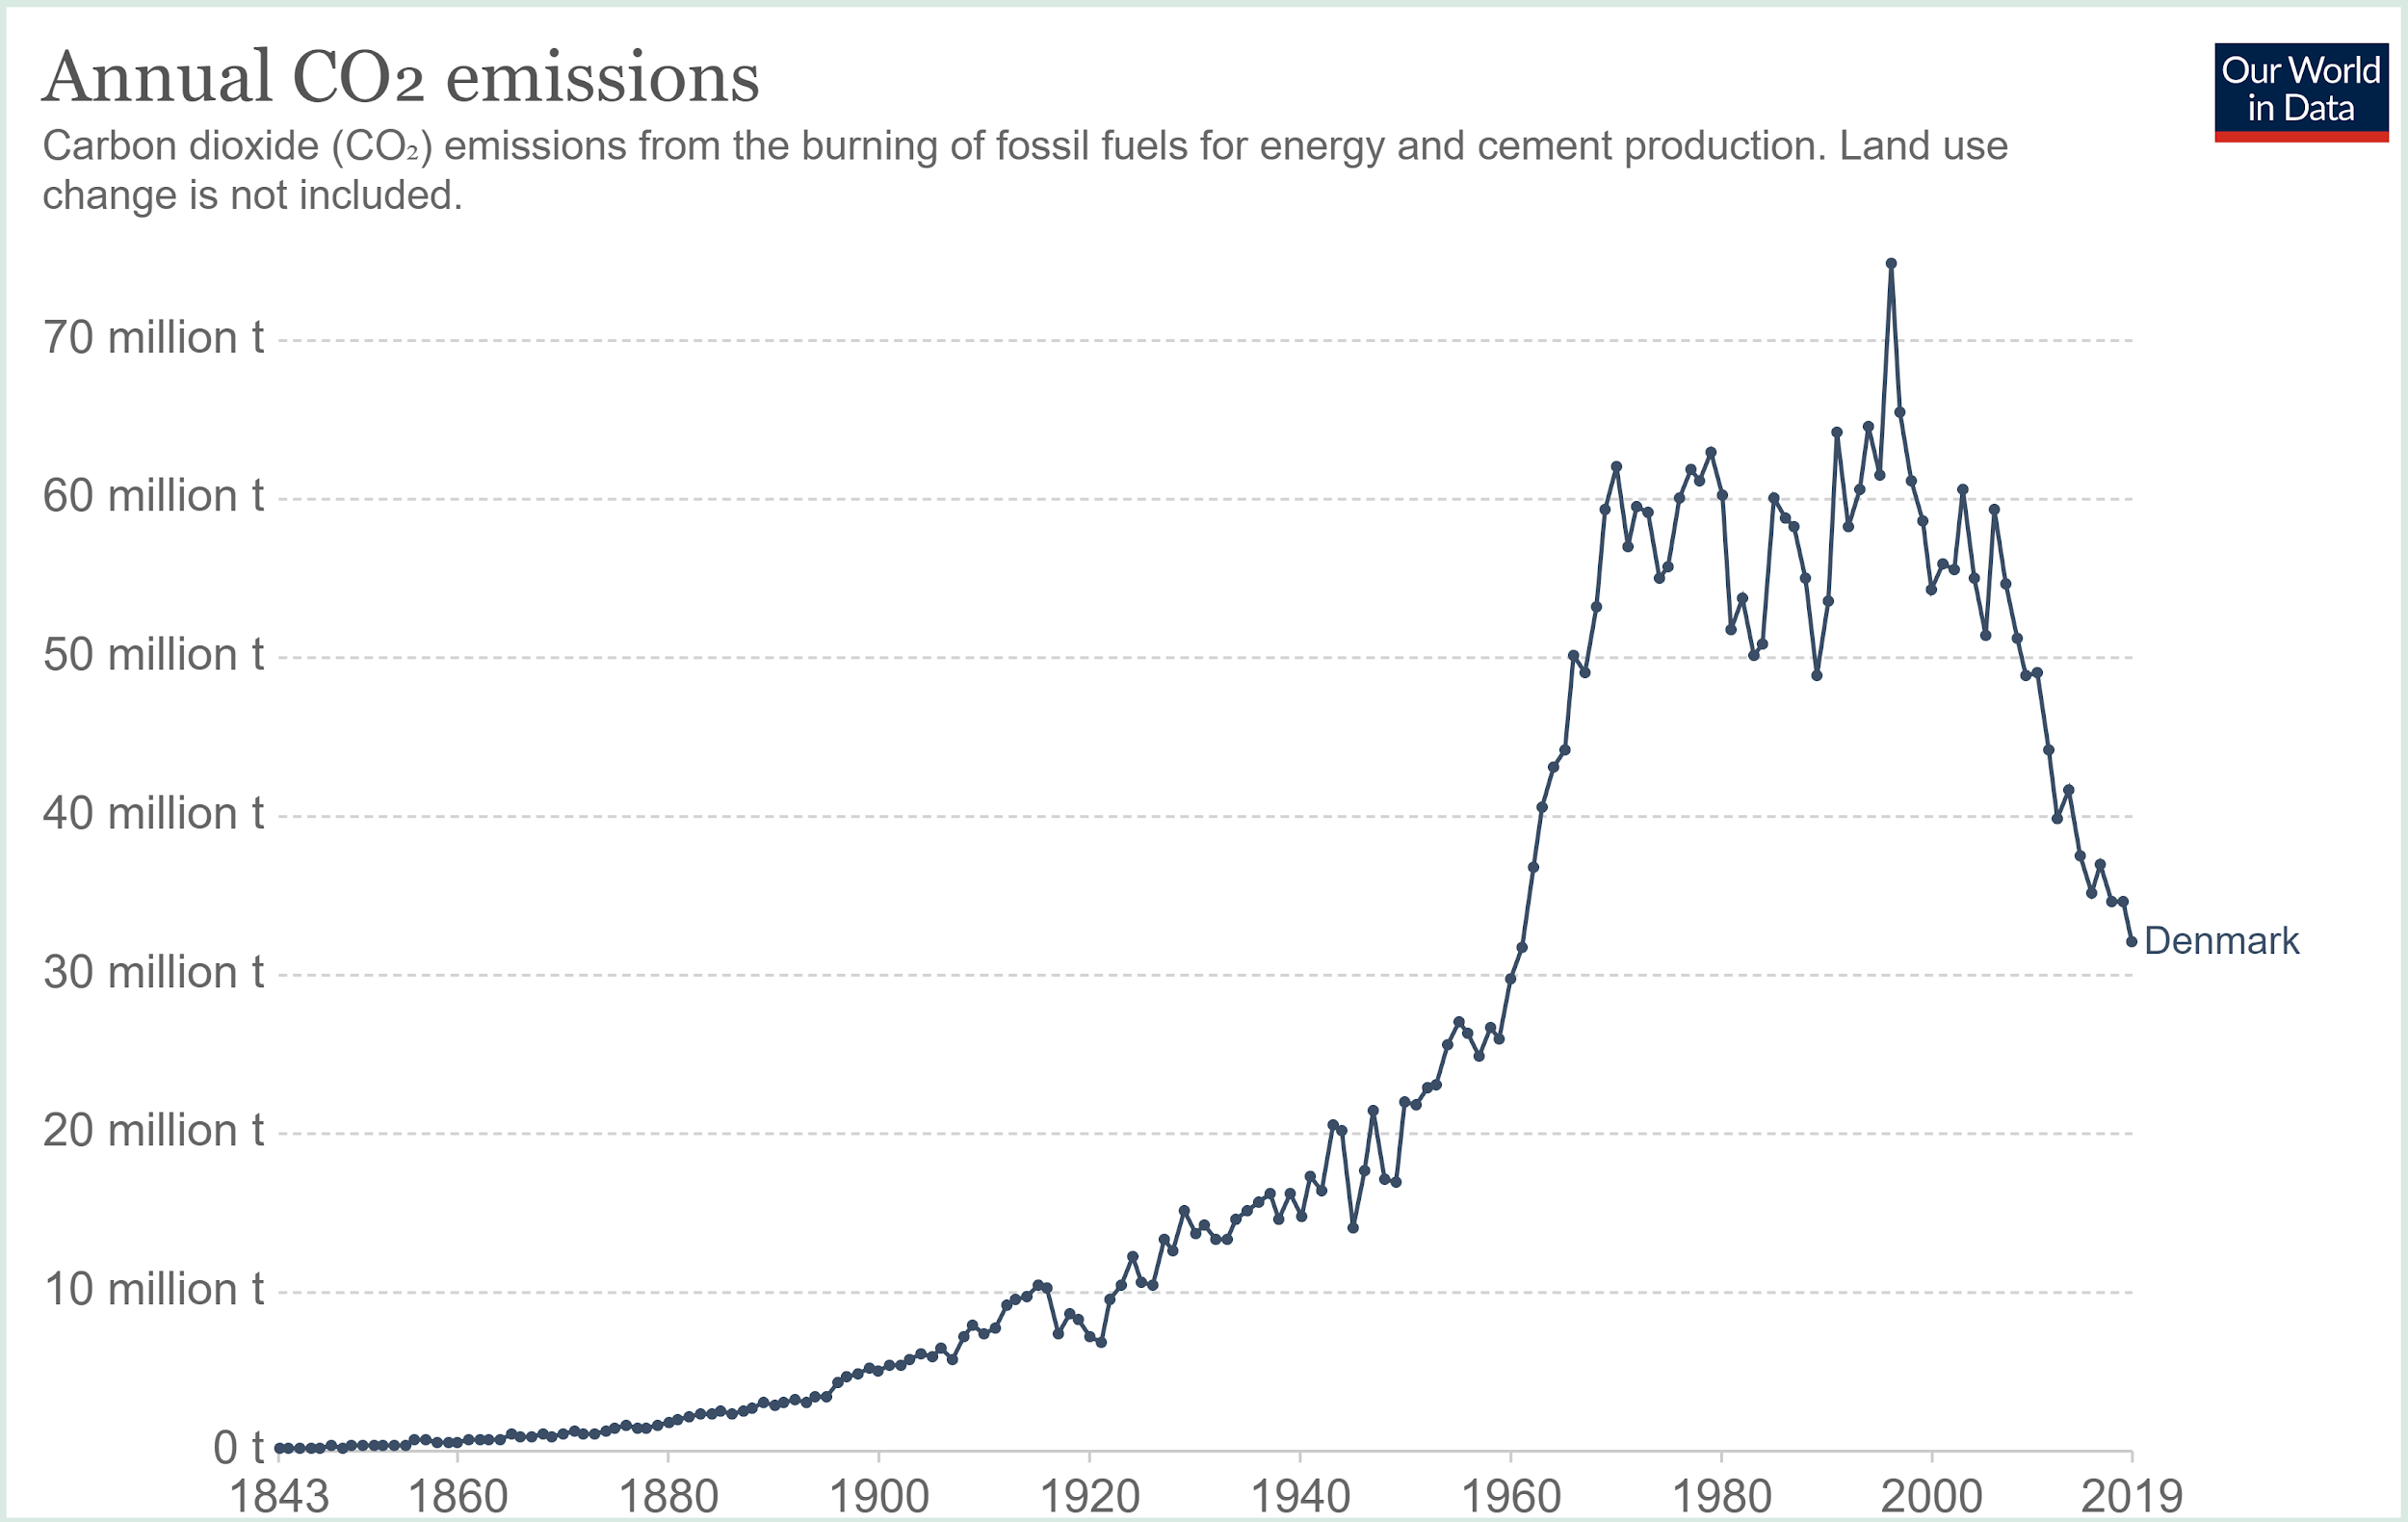 Figure 1. Annual CO2 emissions from the burning of fossil fuels for cement and energy production. Land-use change is excepted. Source: Our World in Data.